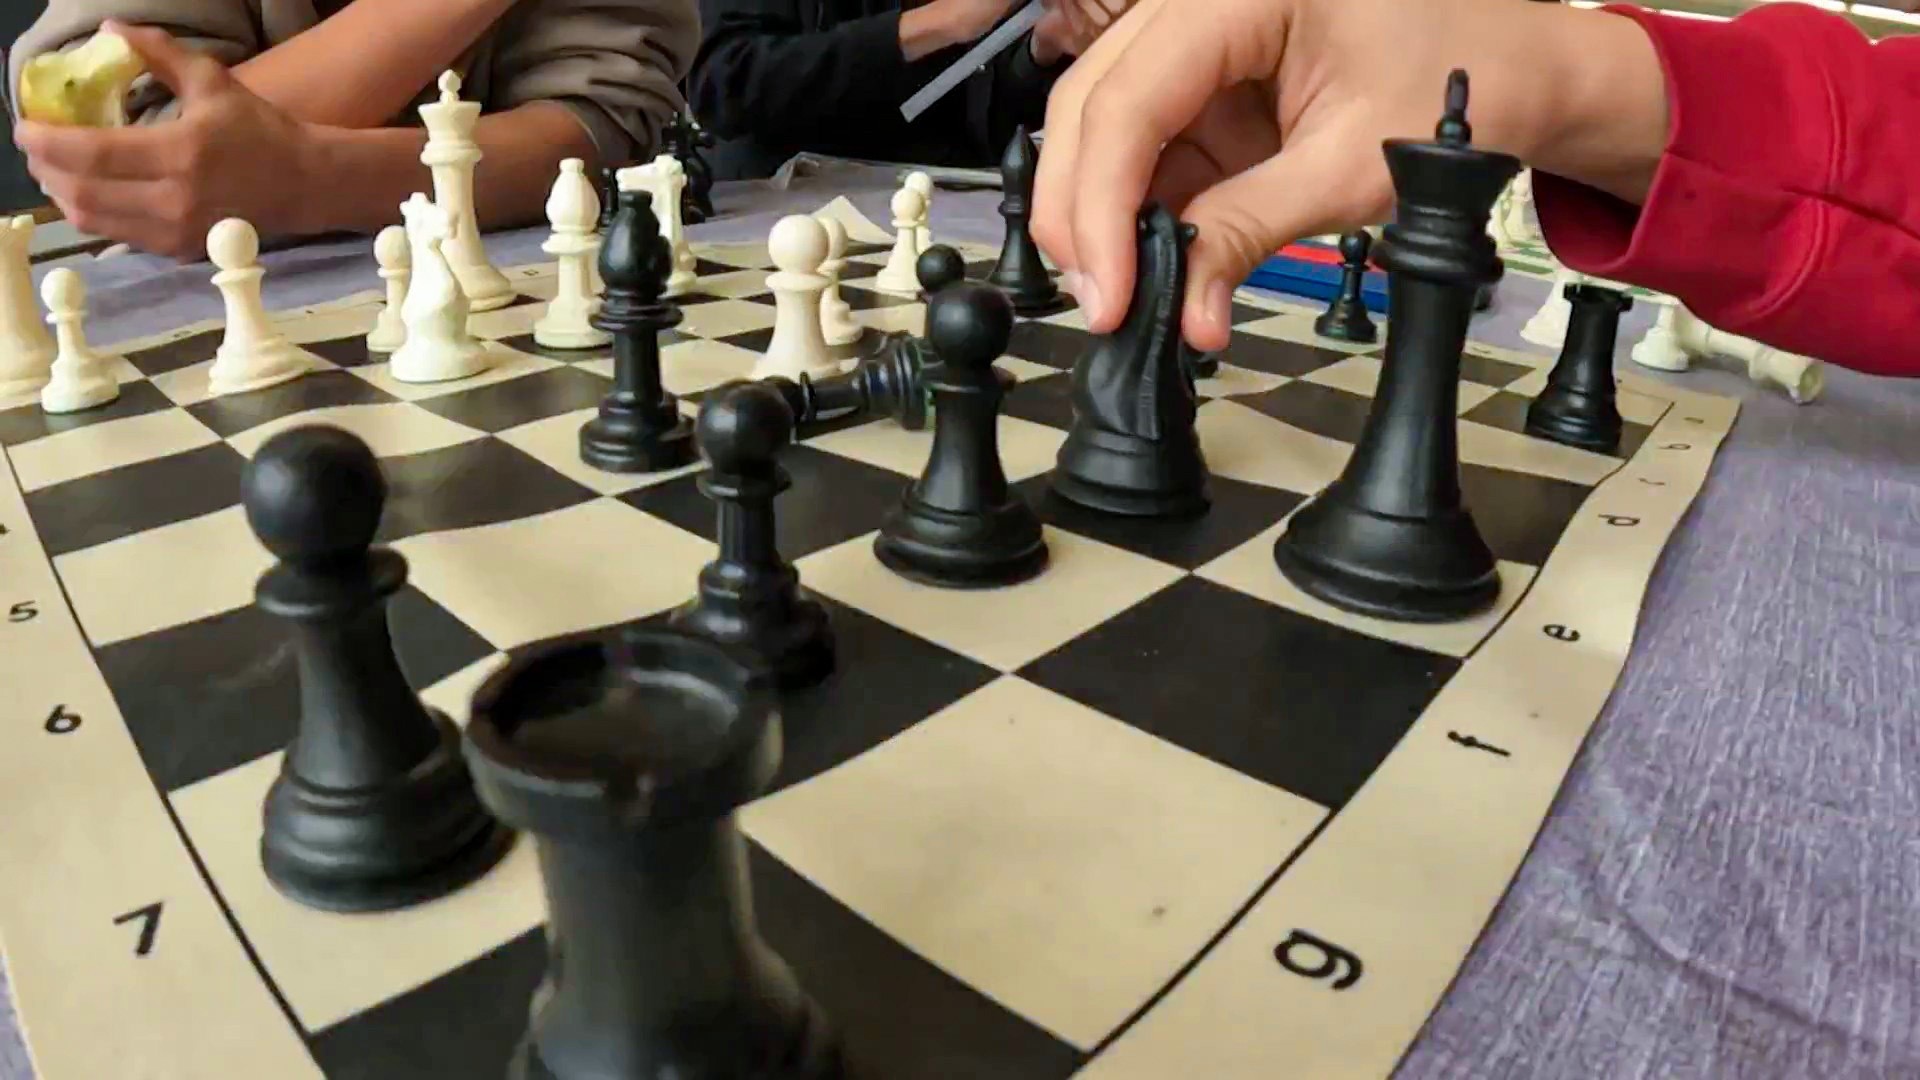 Everybody at School Wants to Play': Chess Is Trendy Again